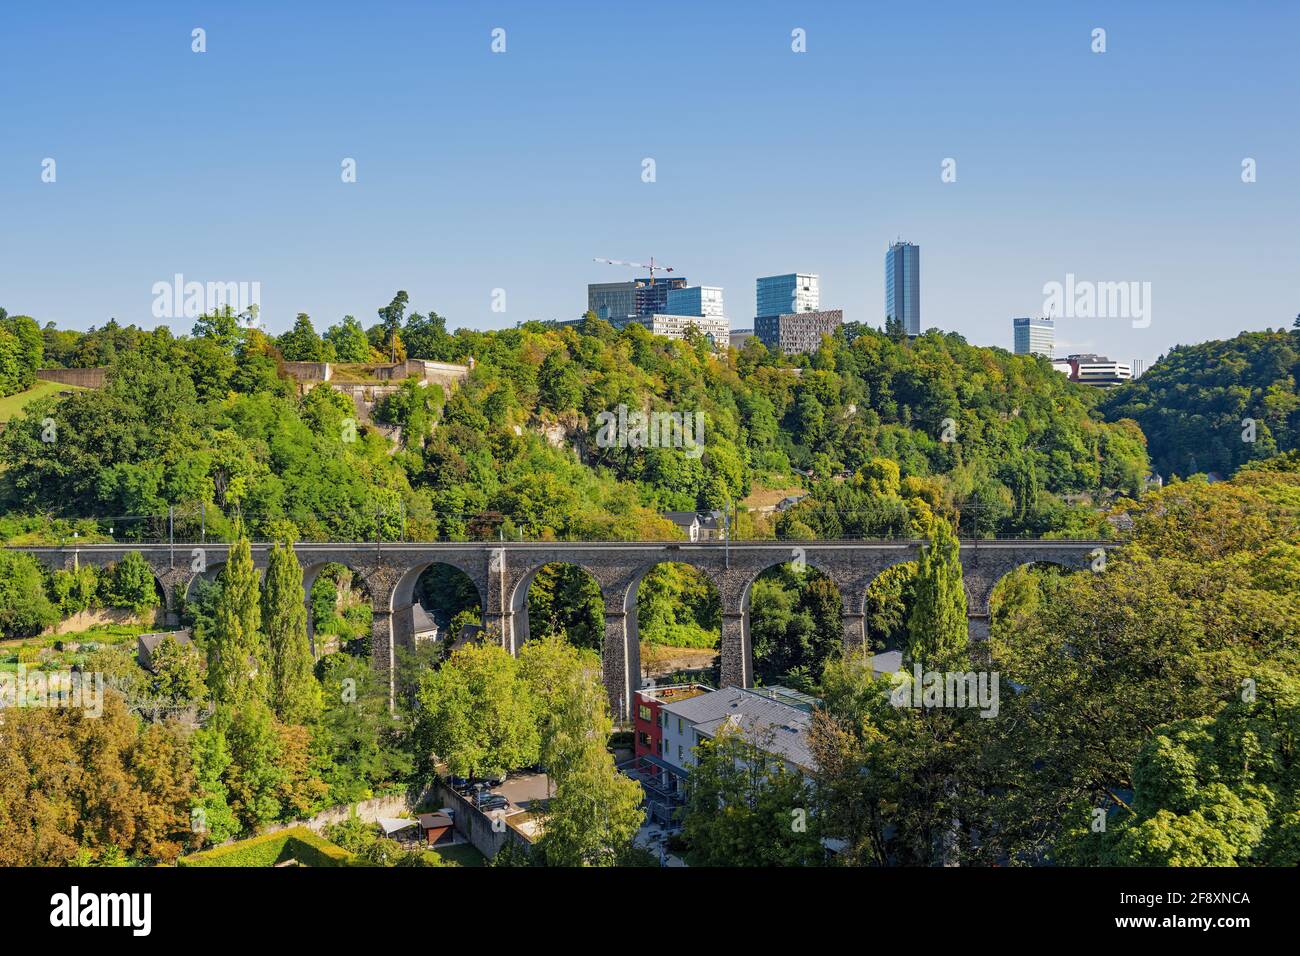 Luxembourg, Europe Quarter, Luxembourg City Stock Photo